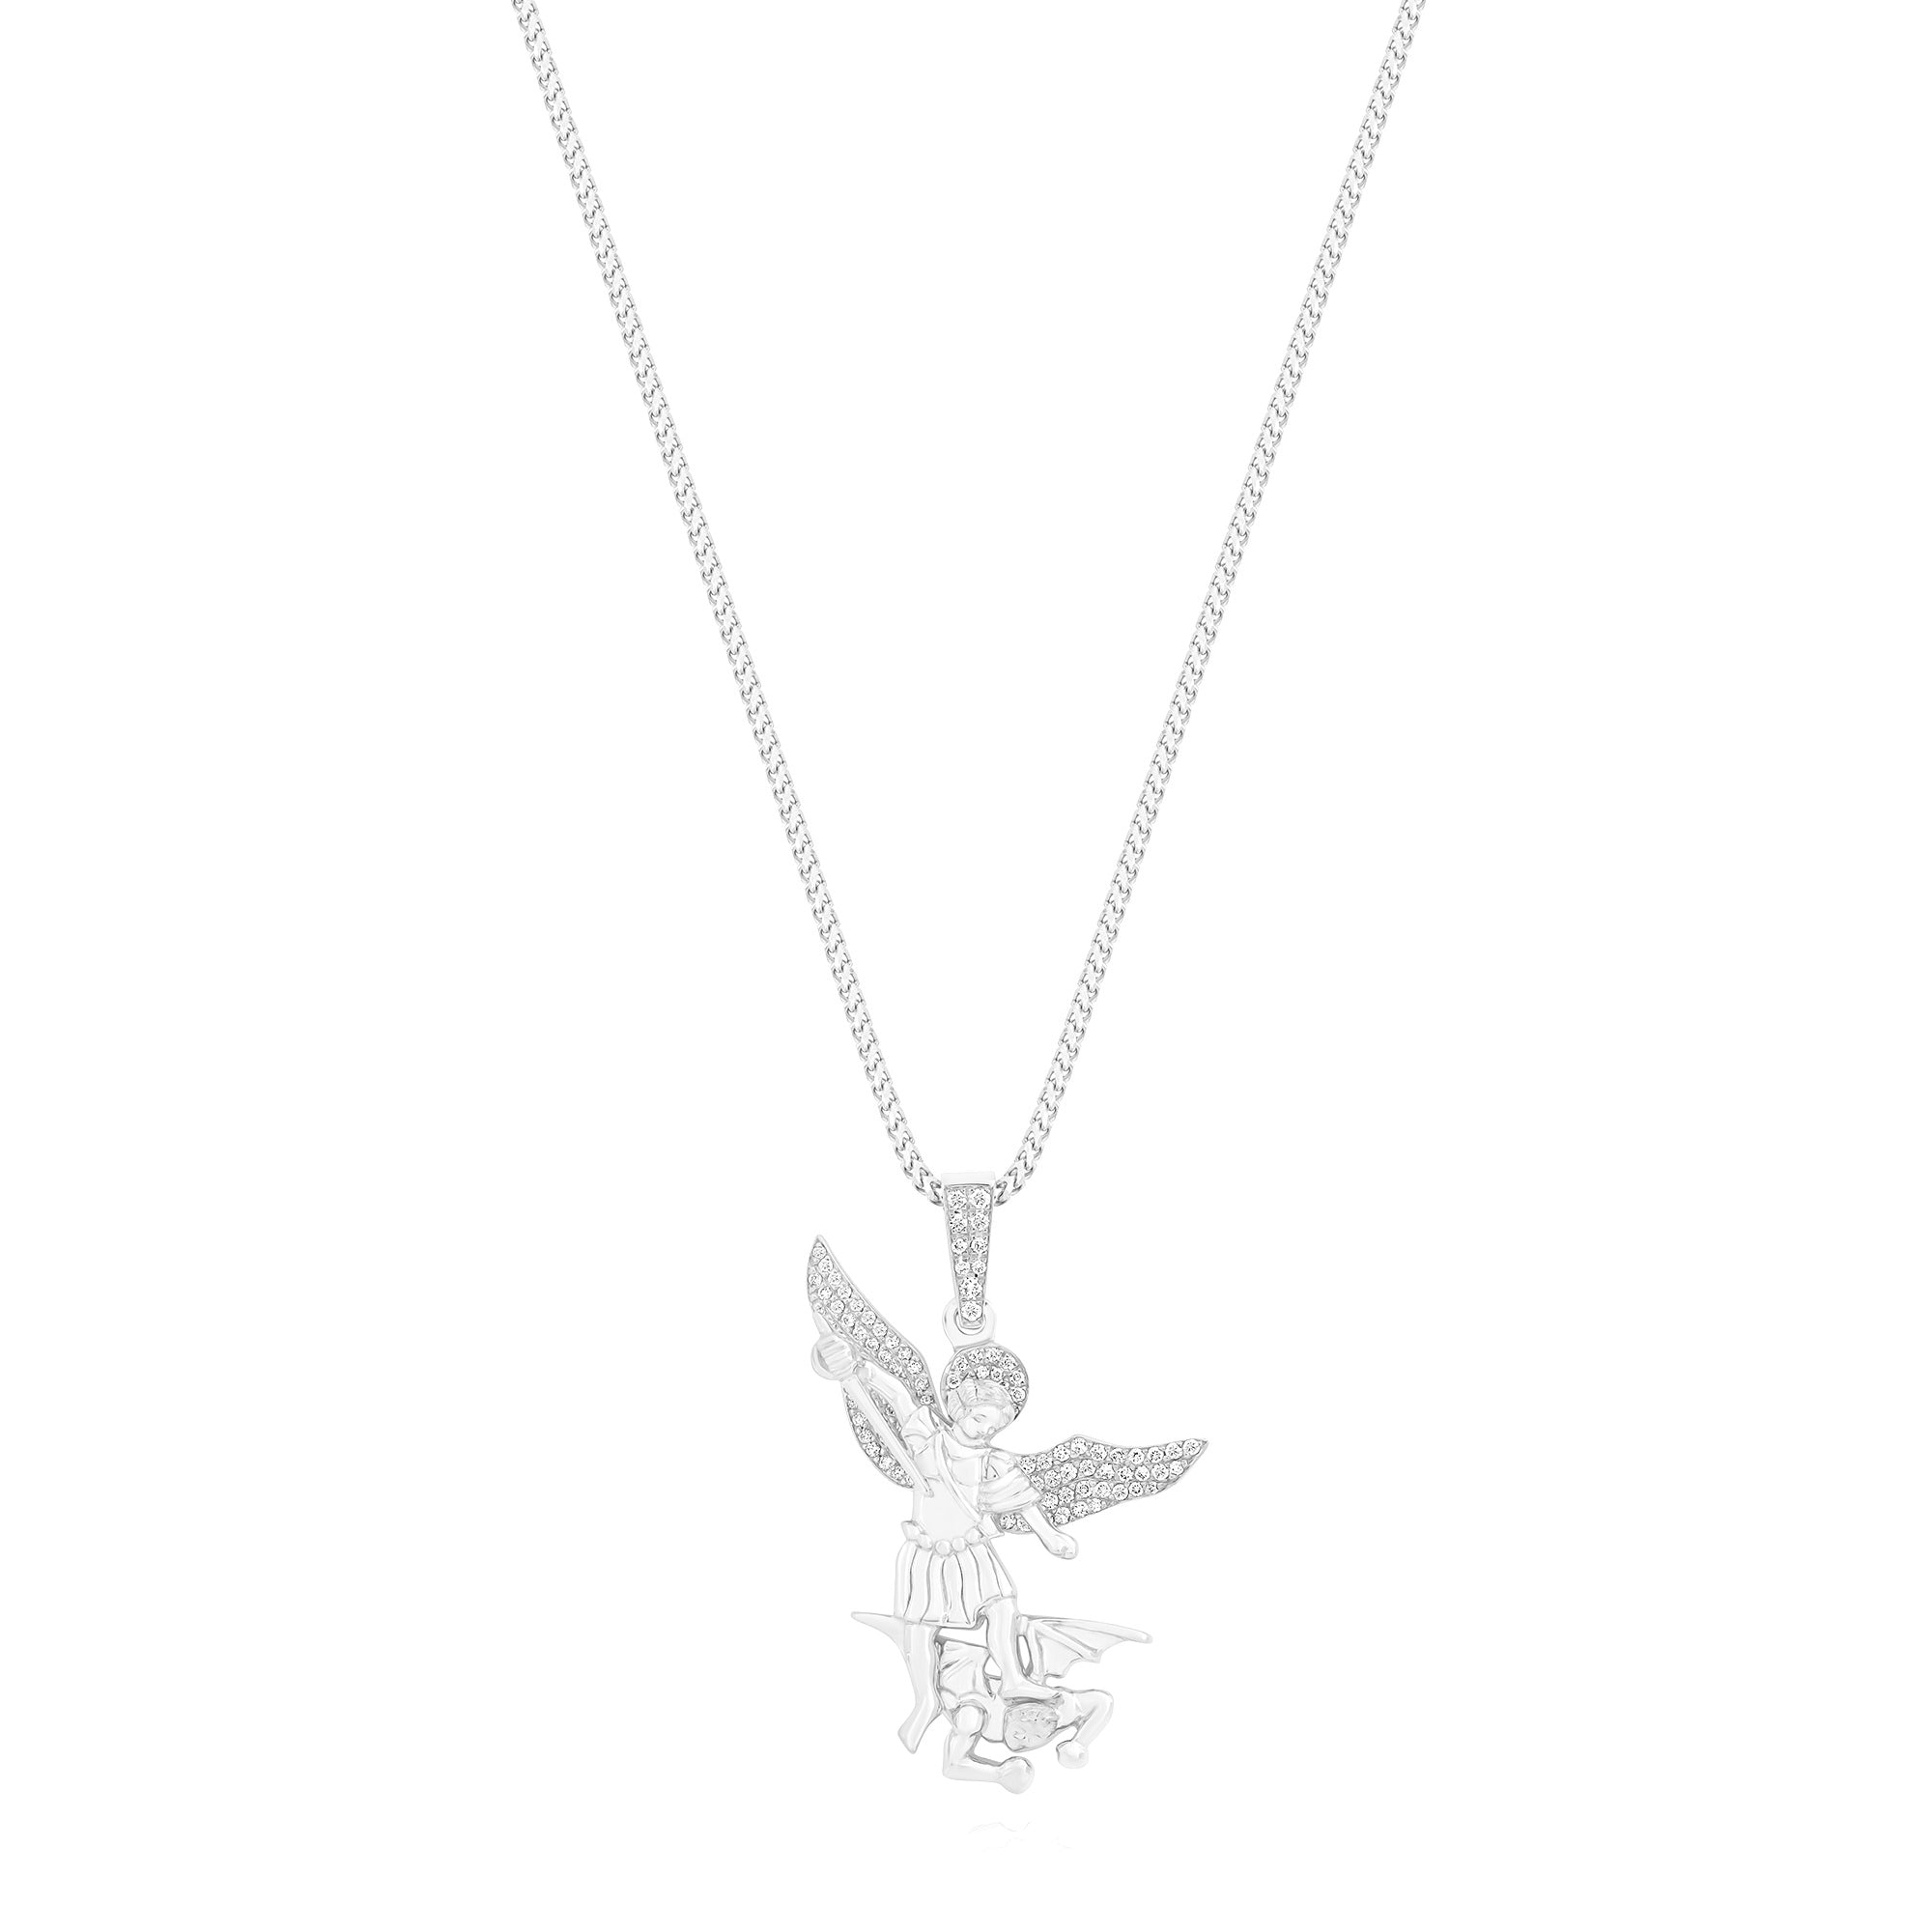 Micro Saint Michael Arch Angel Piece (Partially Iced) (14K WHITE GOLD) - IF & Co. Custom Jewelers